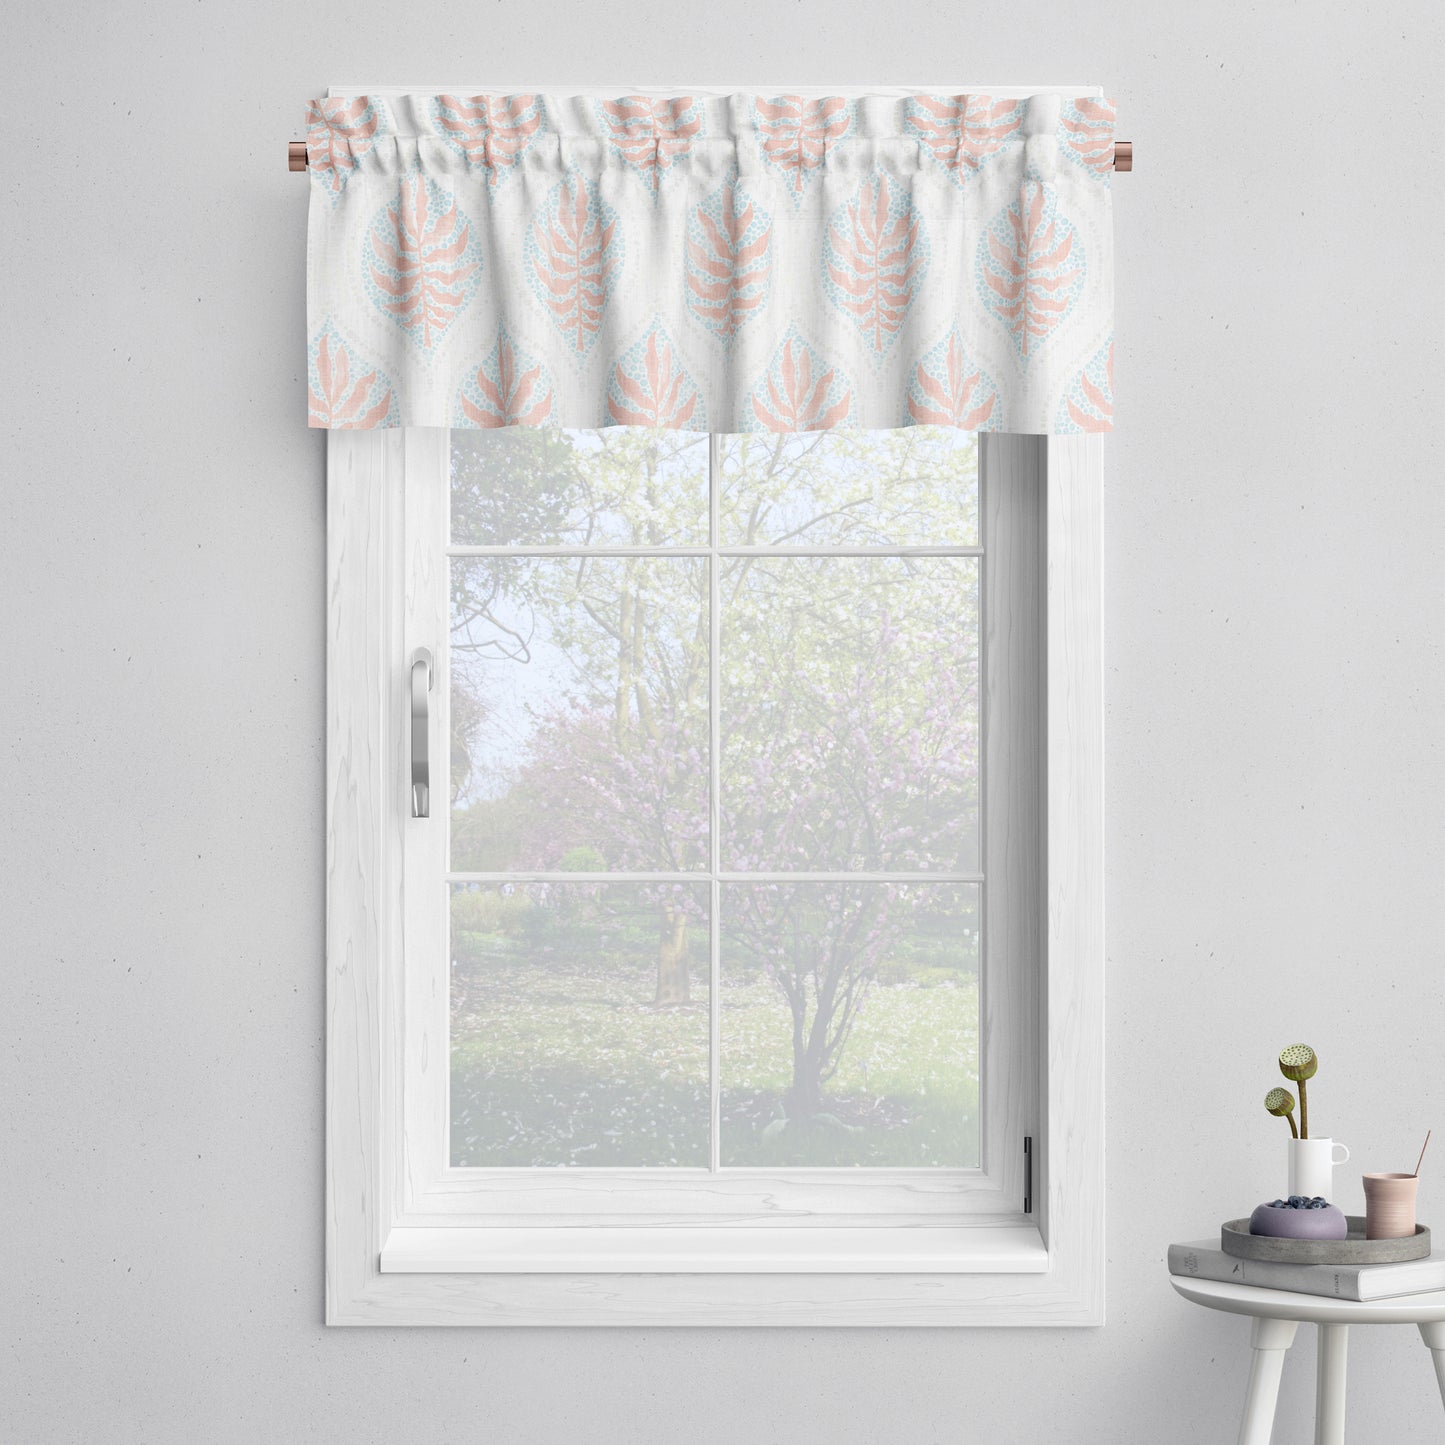 Tailored Valance in Airlie Coral Ogee Floral Watercolor - with Blue, Gray